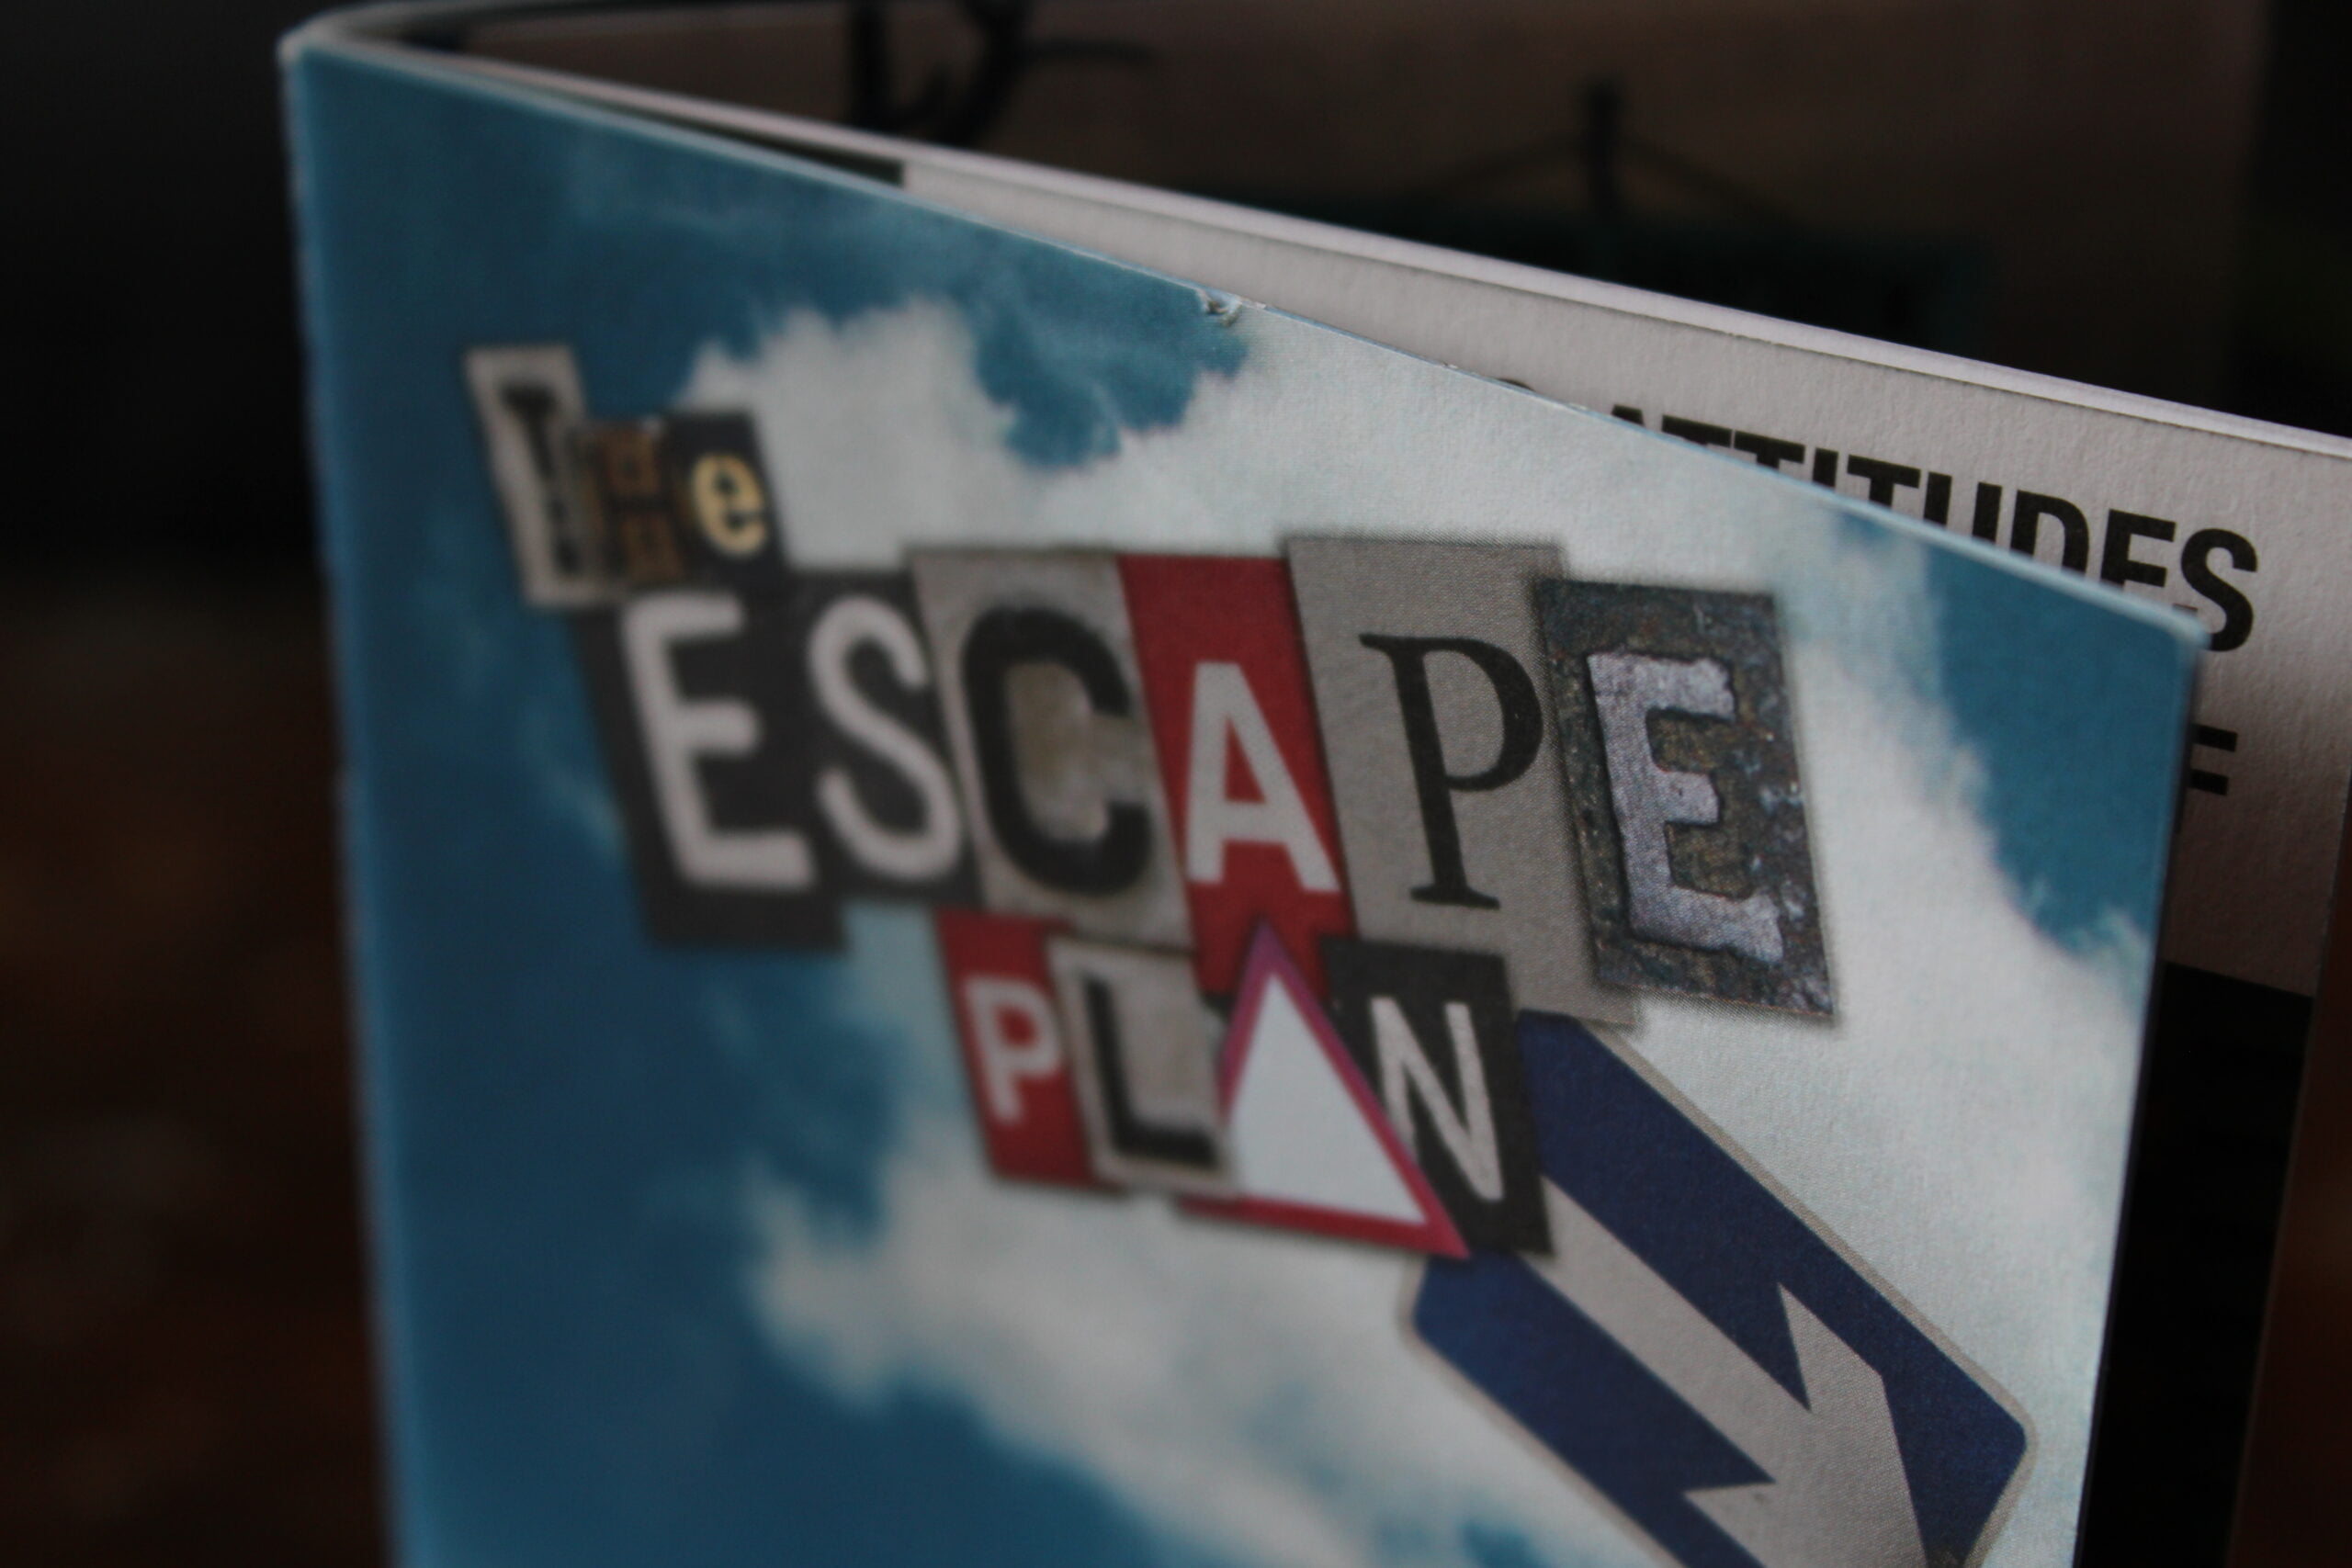 Image of the escape plan booklet